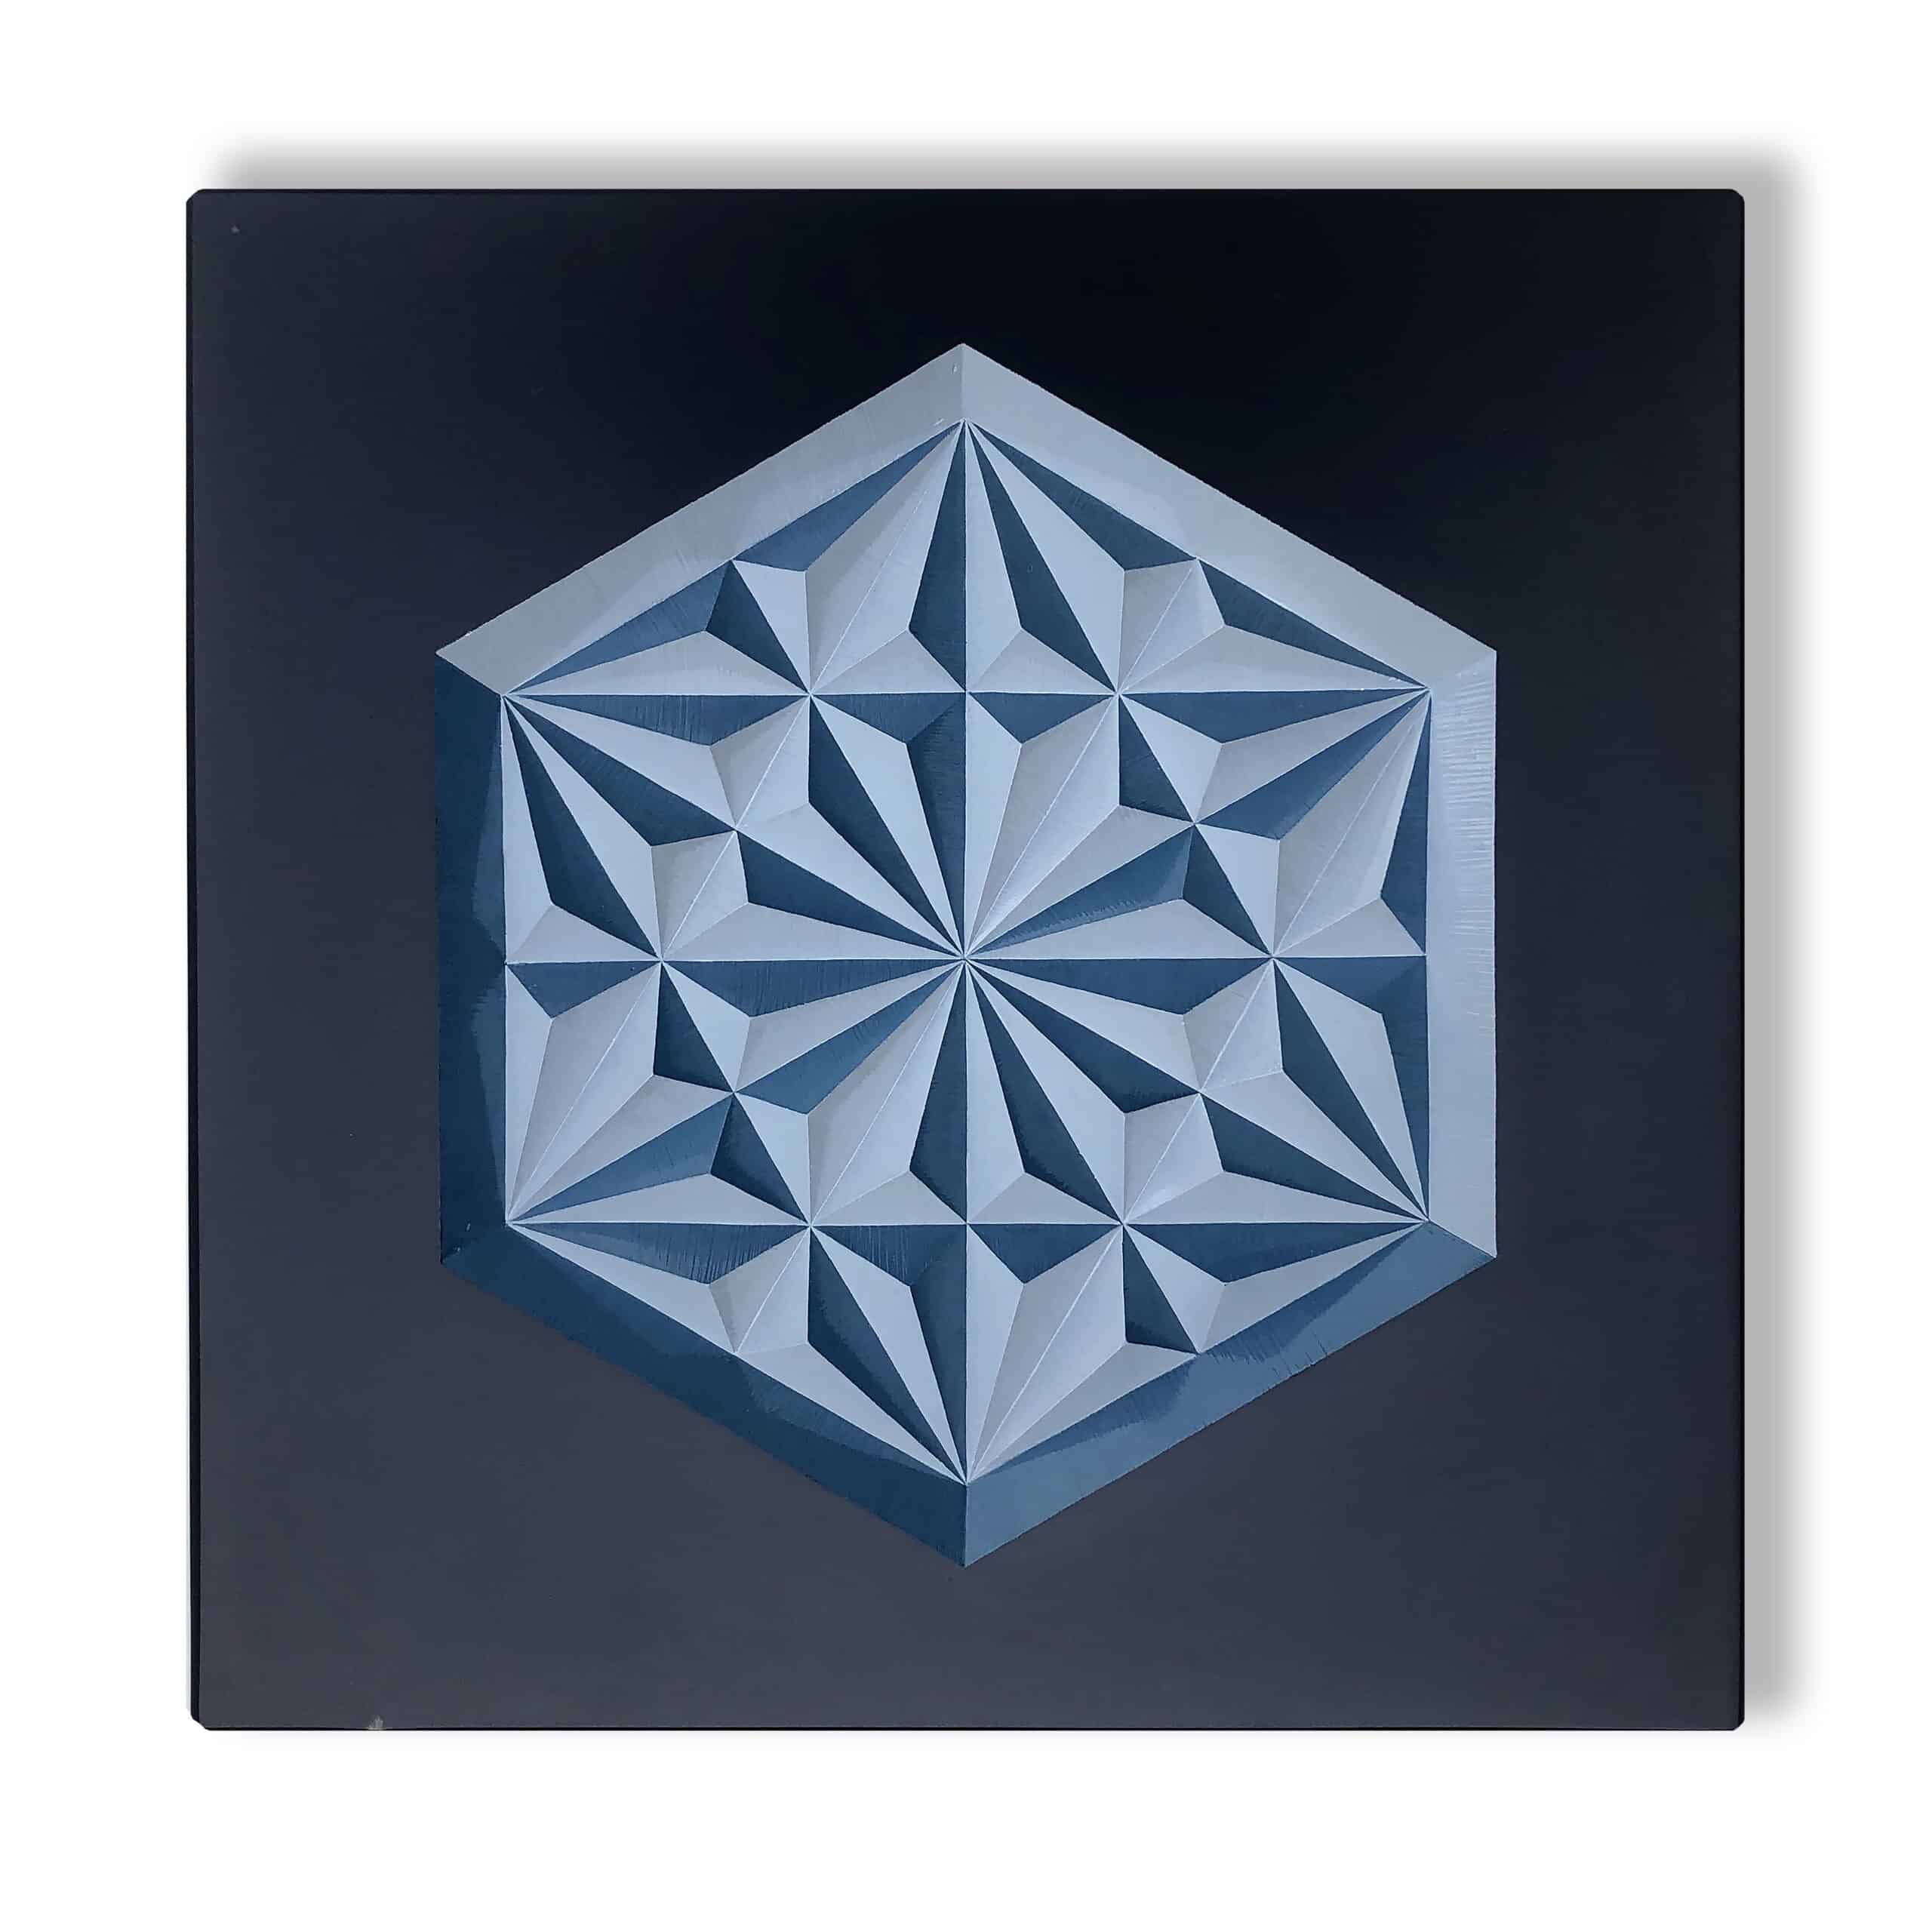 Decorative geometric pattern carved into slate and painted two shades of blue with enamel paint